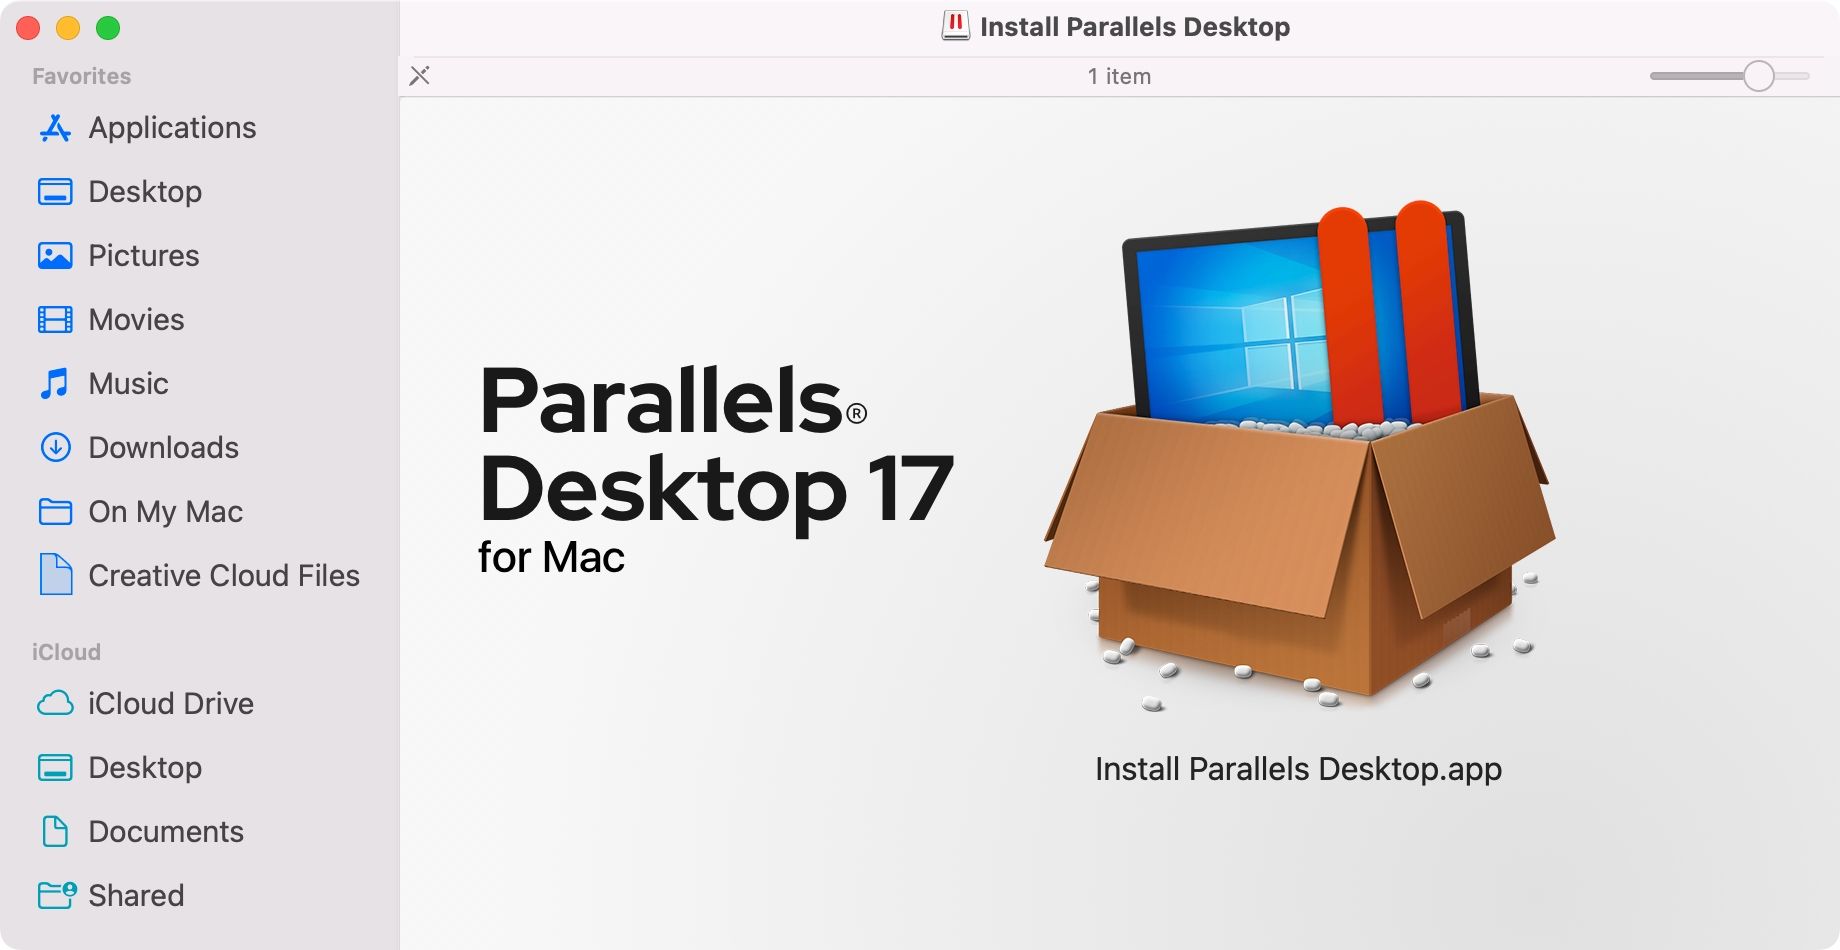 A mounted Parallels Desktop disk image in the Mac's Finder